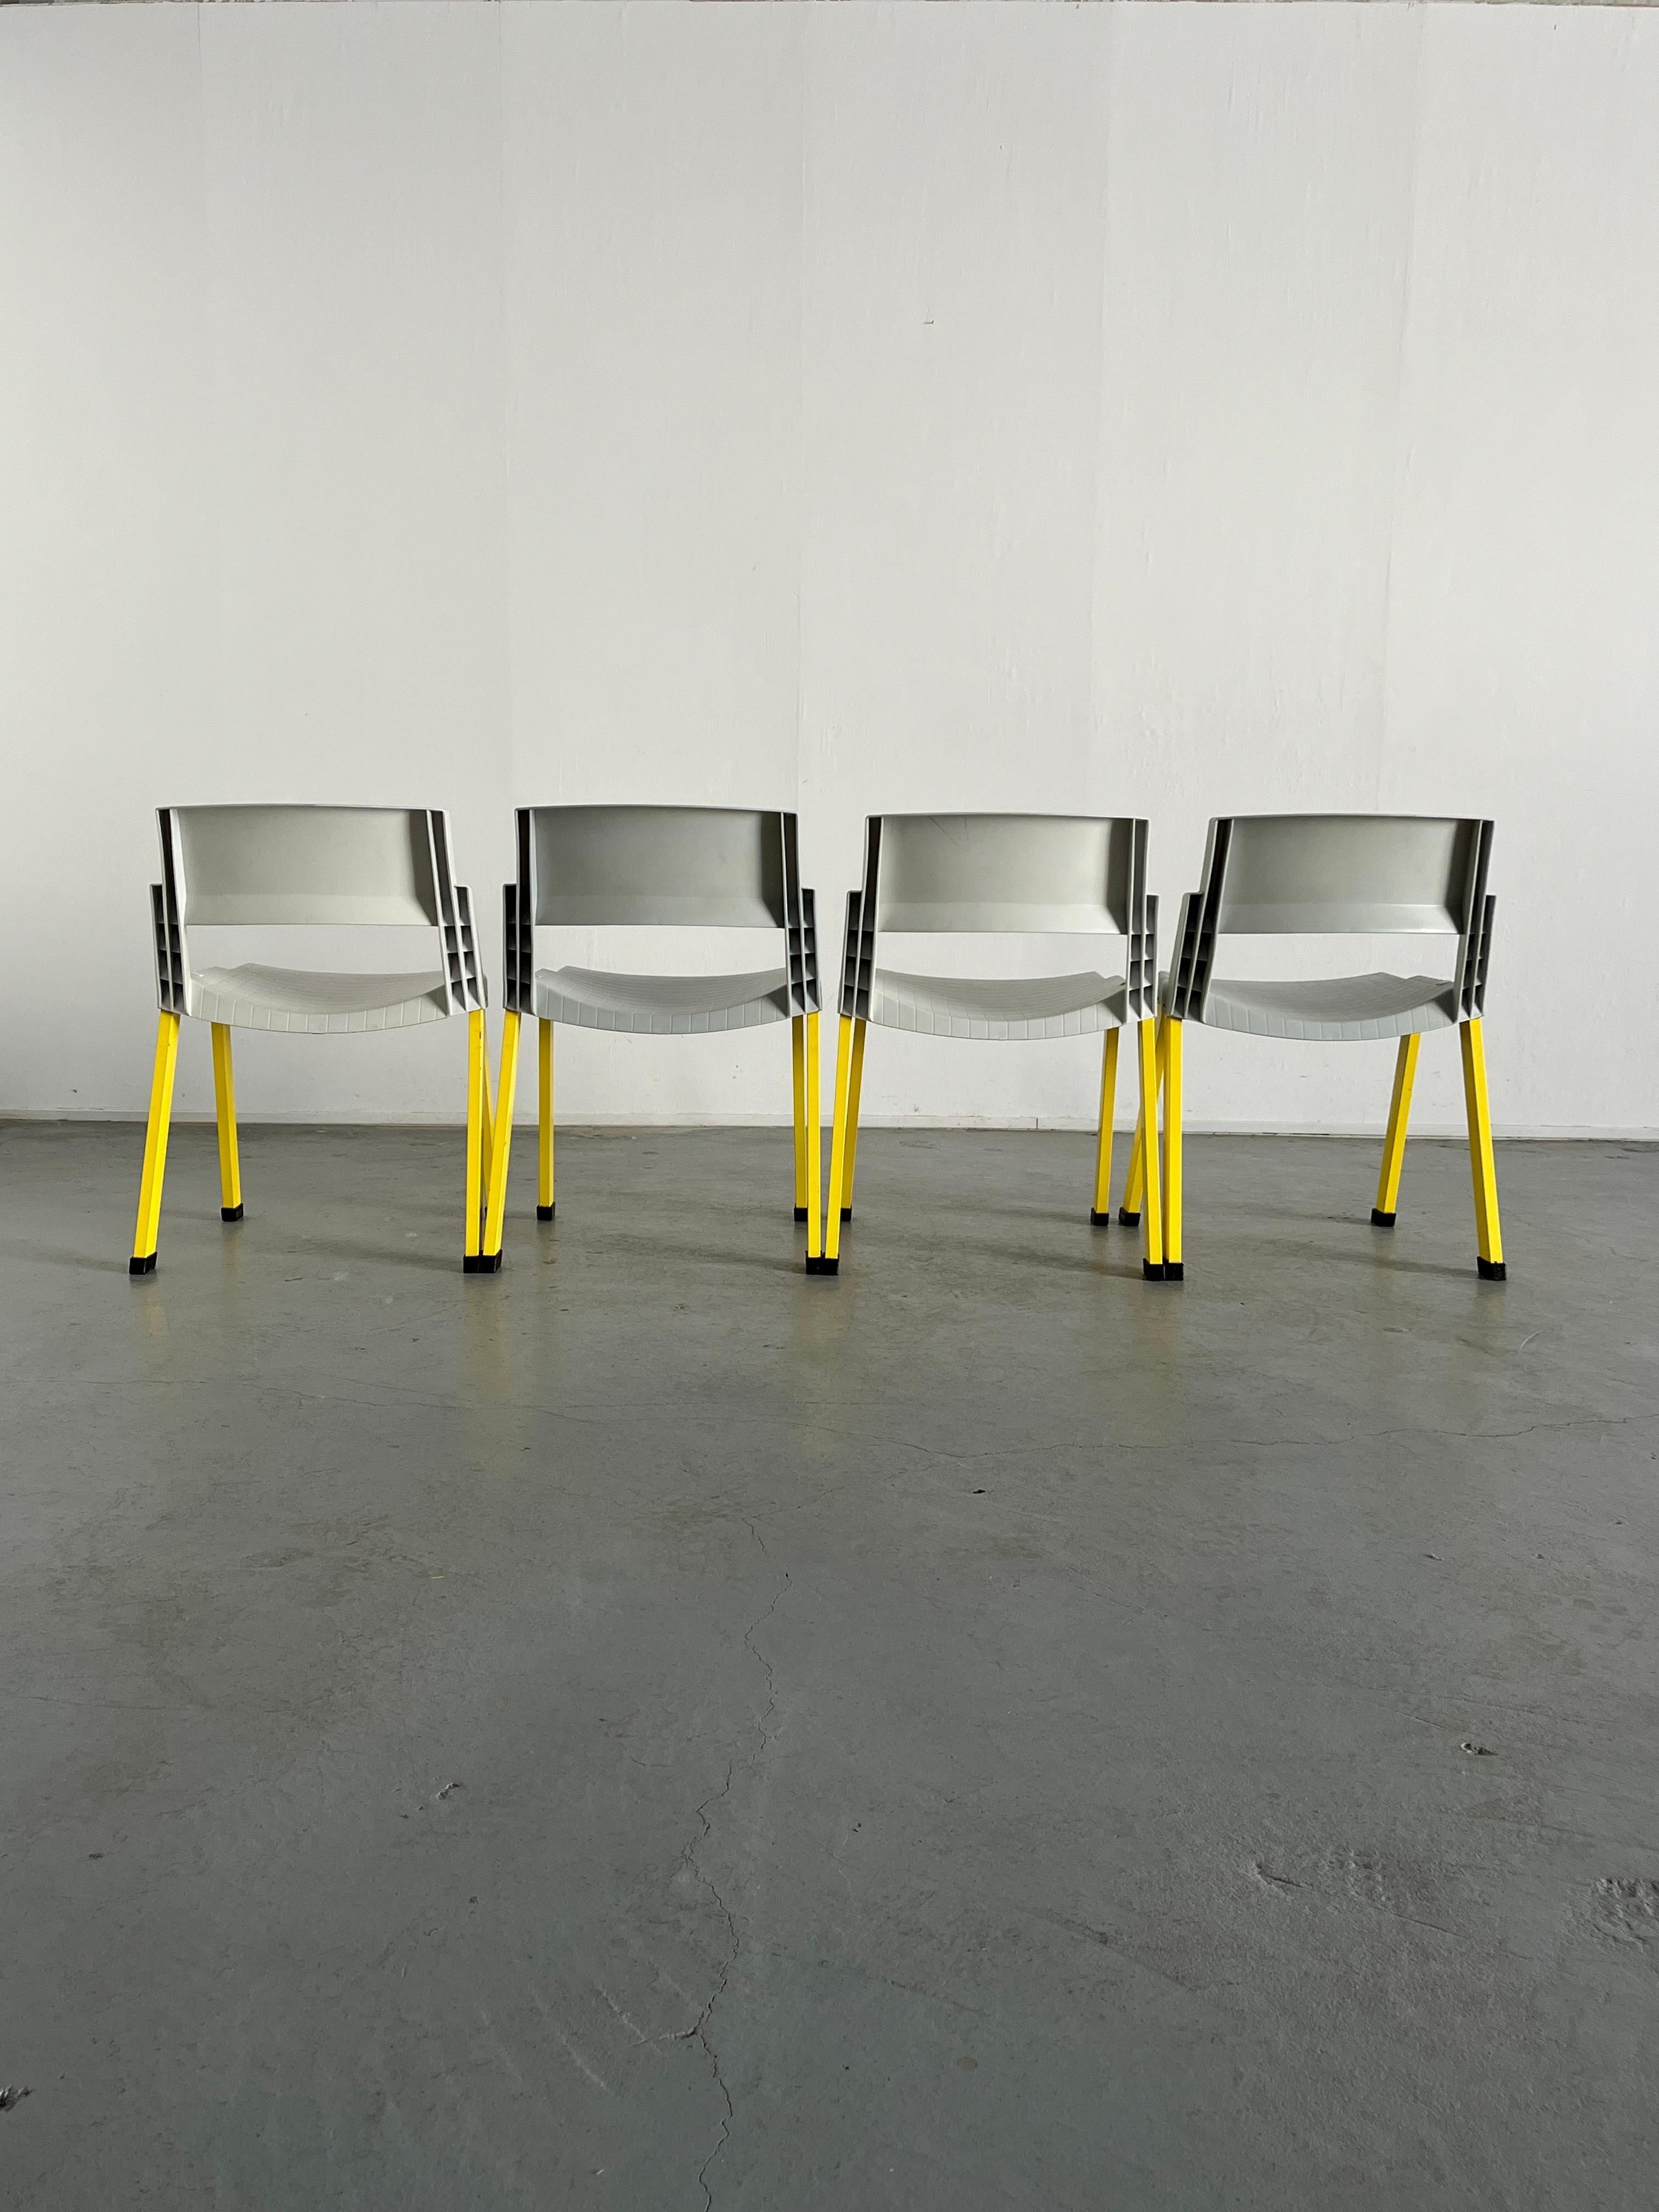 Set of 4 Postmodern 'City' Chairs by Paolo Orlandini and Roberto Lucci for Lamm In Good Condition For Sale In Zagreb, HR